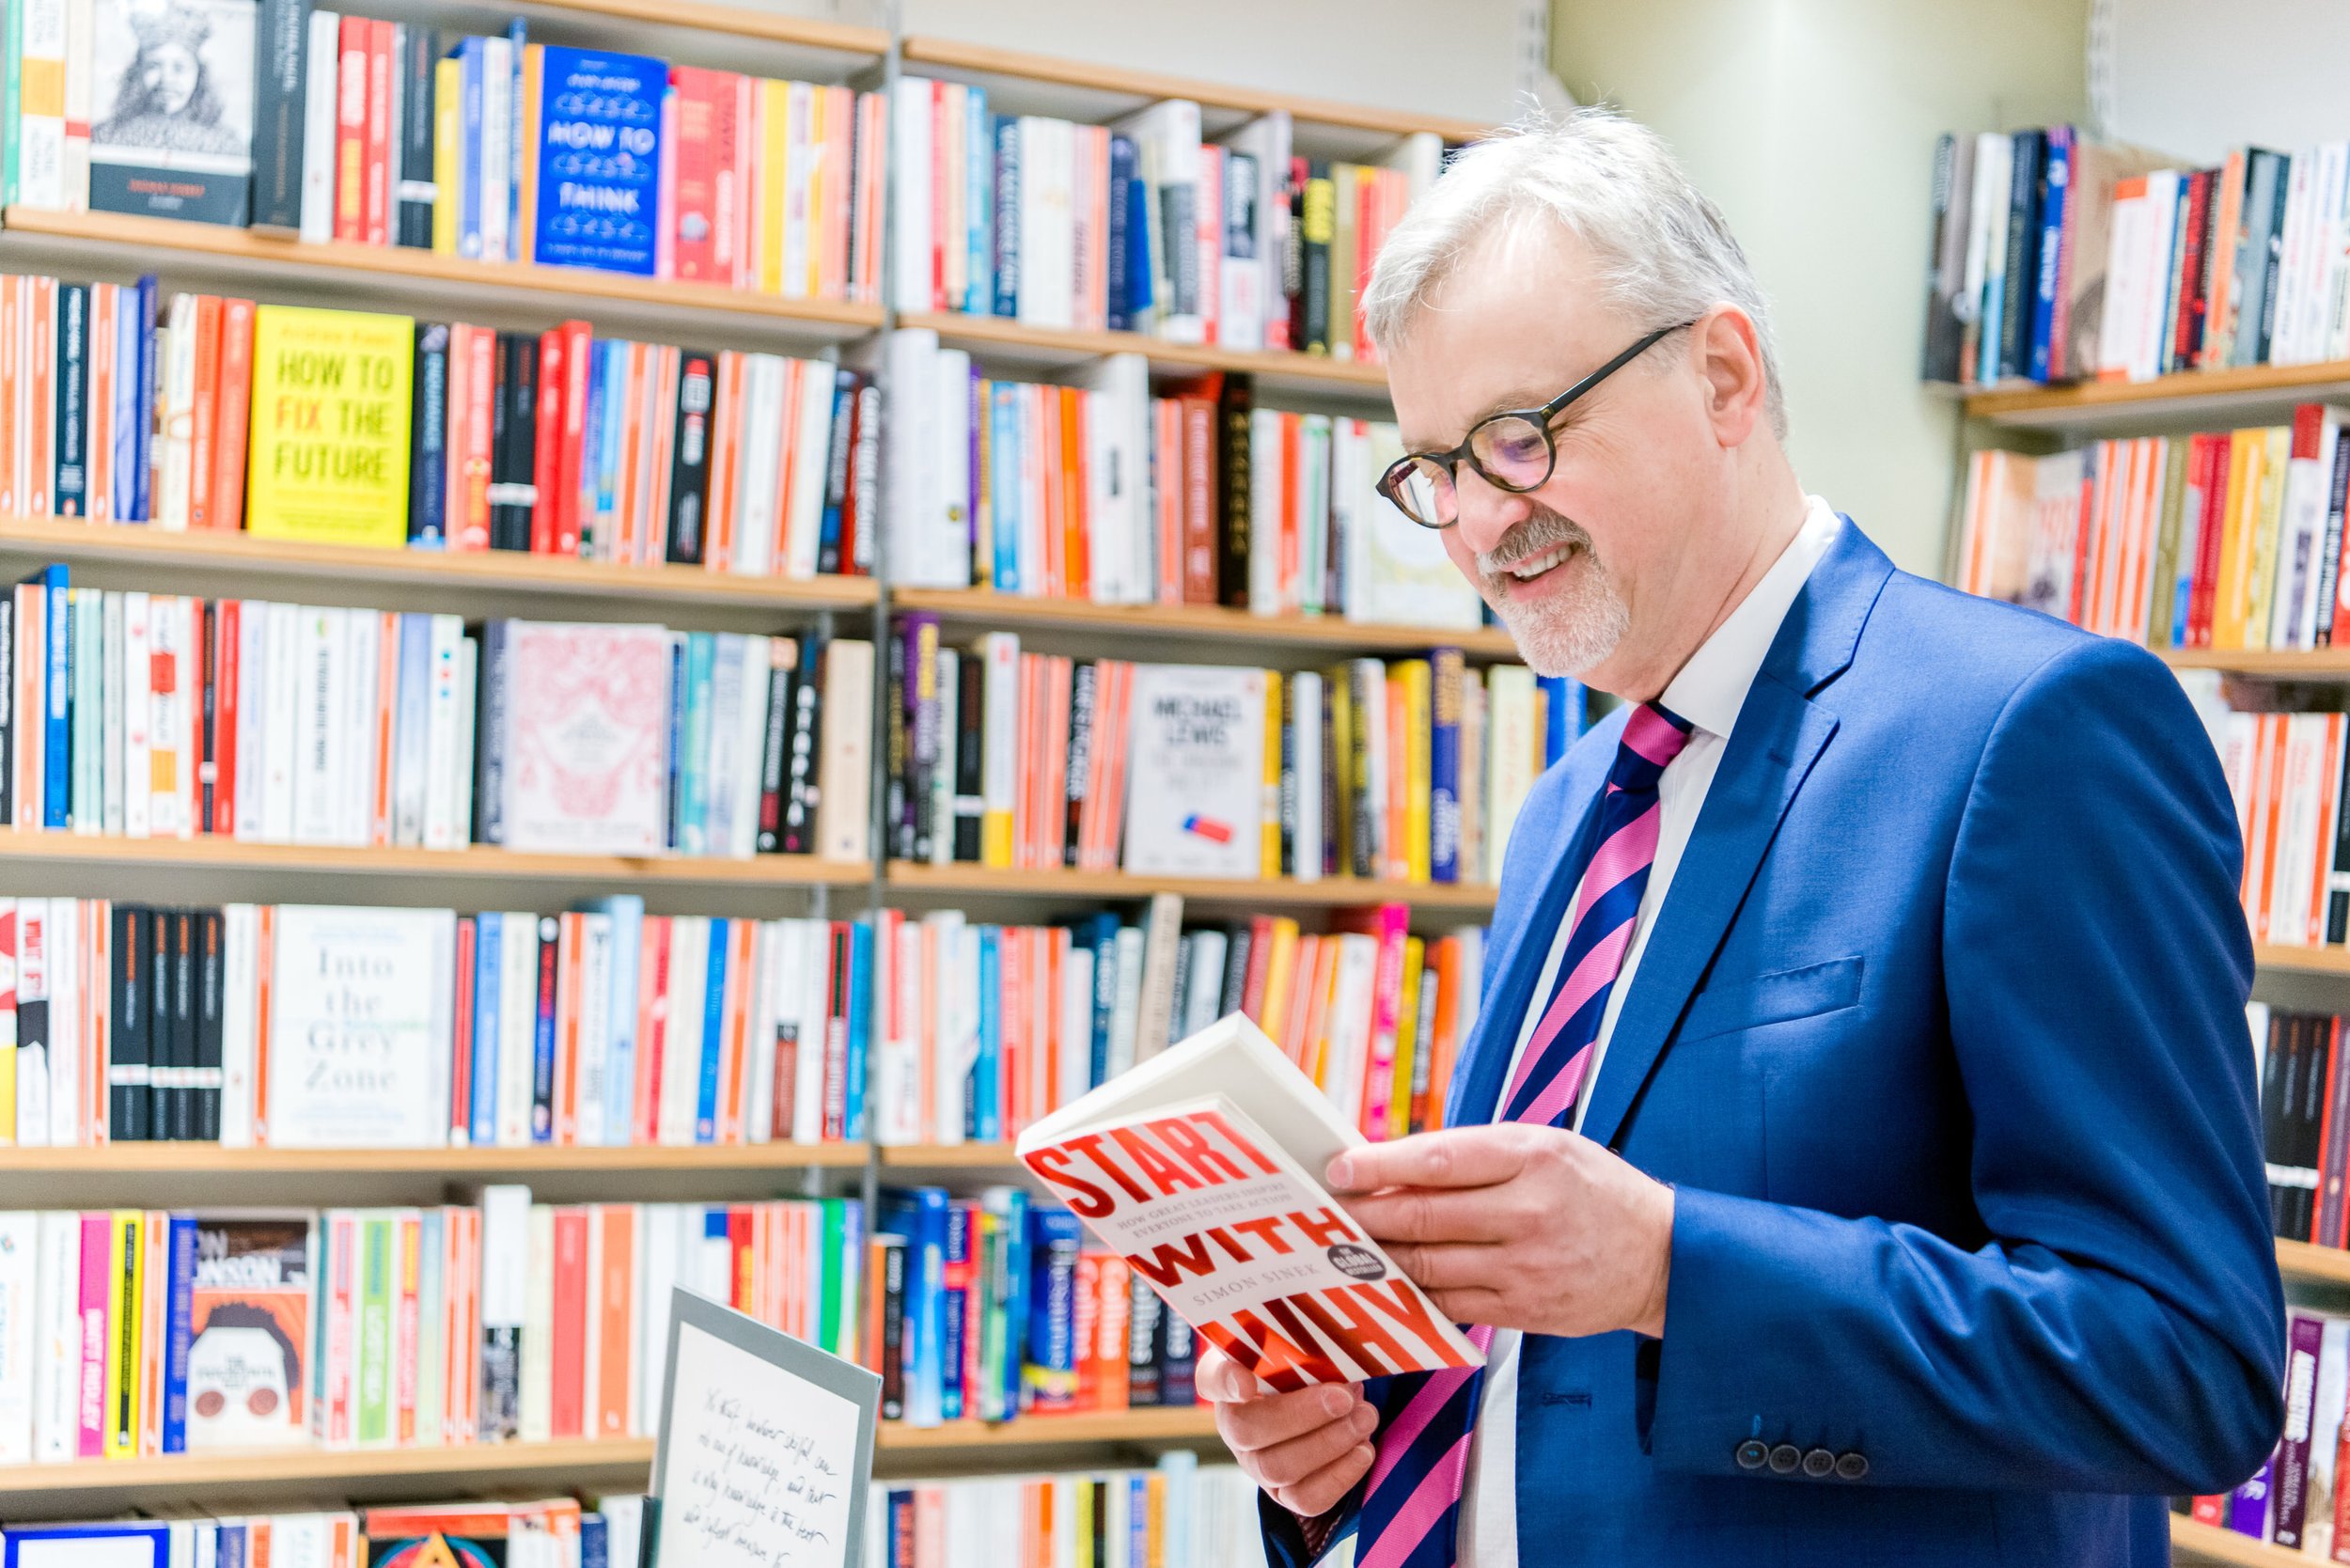  Man in suit holds up business book against a colourful background in a book shop 